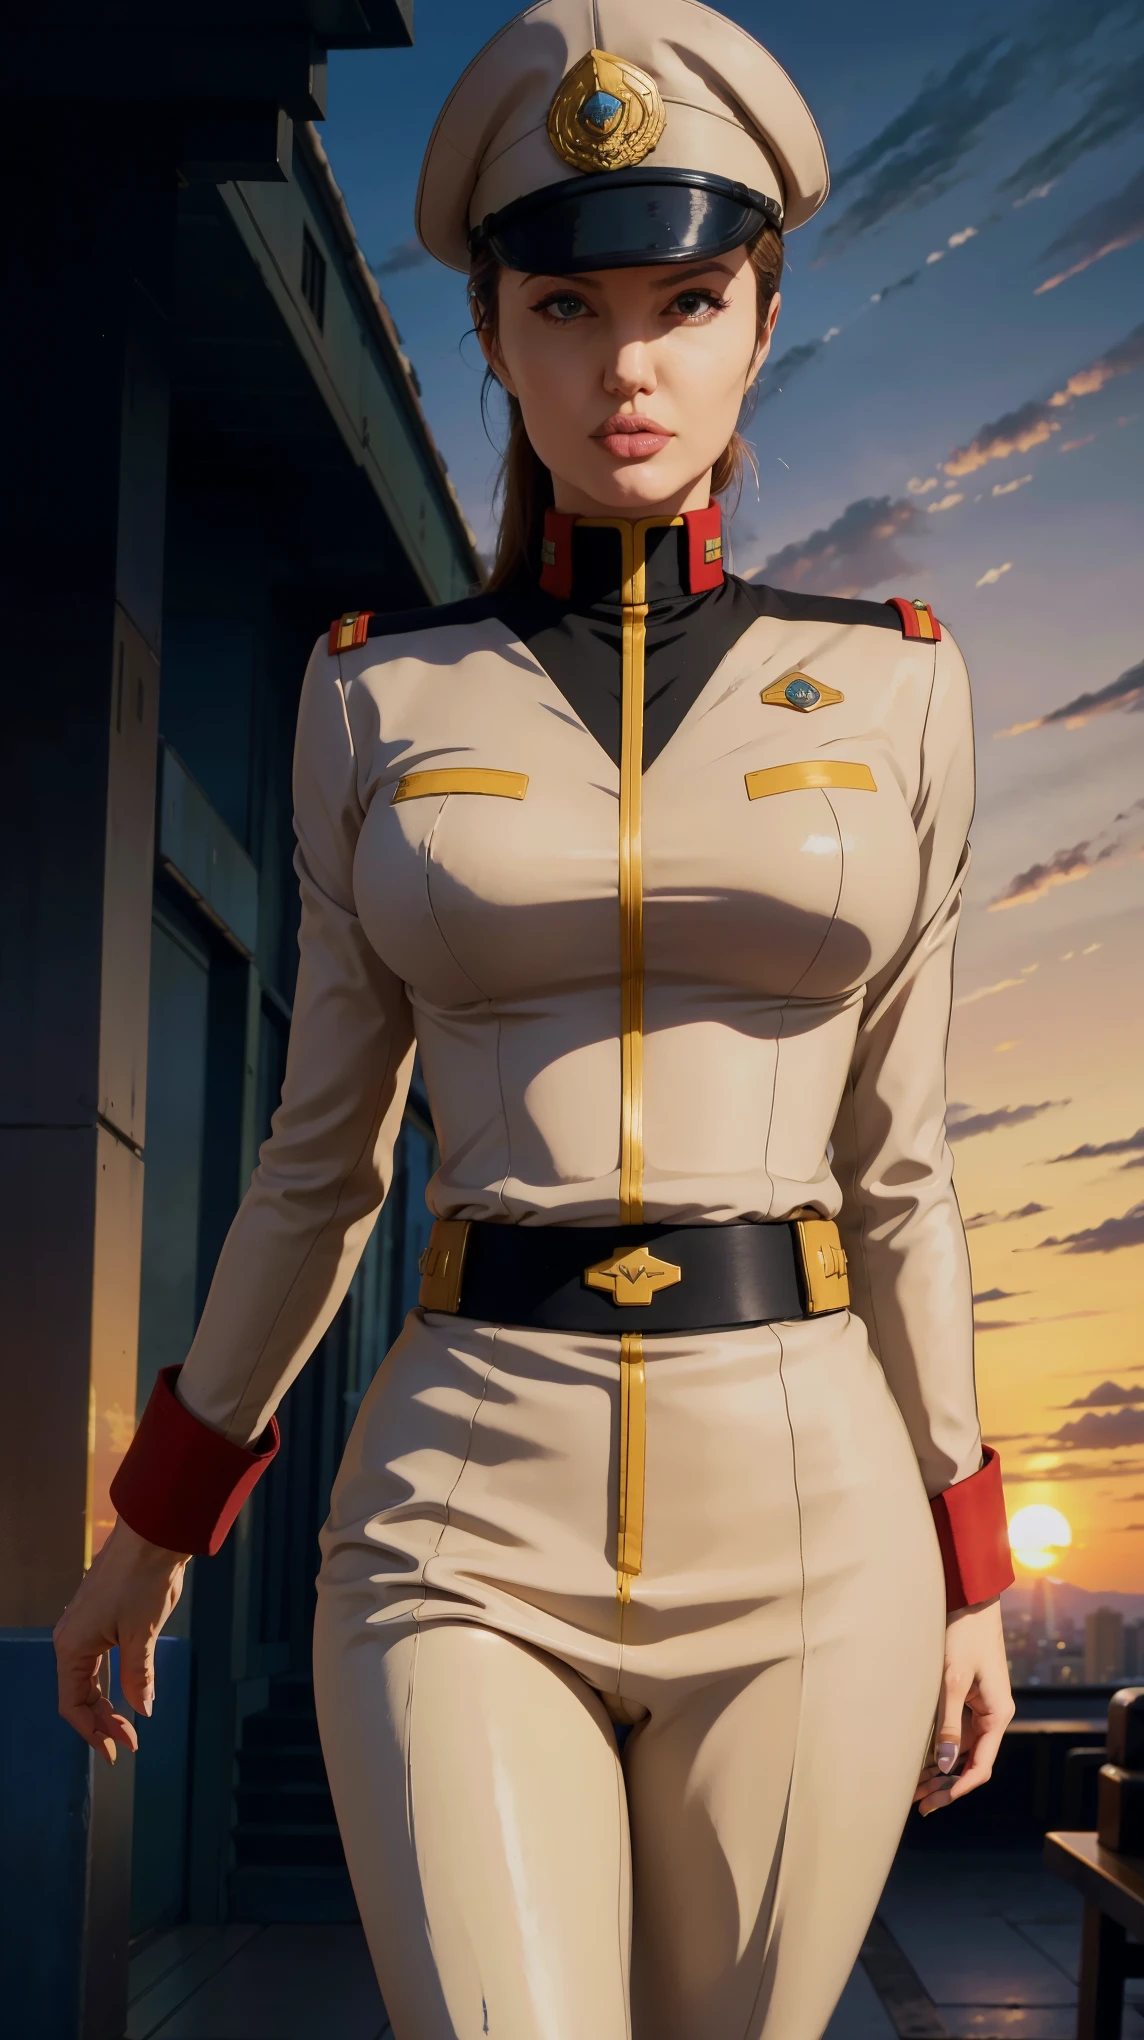 (((masterpiece,highest quality,In 8K,super detailed,High resolution,anime style,Absolutely))),(A female Earth Federation Forces officer is walking.:1.5),(solo:1.5),((ten-hut:1.5)),(Angelina jolie:1.5),((The background is a big sunset:1.5)),((blur background:1.5))),BREAK (Wearing the uniform of the Earth Federation Forces:1.5),(Wearing a federal officer&#39;s hat:1.5),(Beautiful woman:1.4),(Detailed facial depiction:1.4),(beautiful hands:1.4),(detailed hands:1.2),(wallpaper:1.5),(whole body:1.5),((overlooking:1.5))